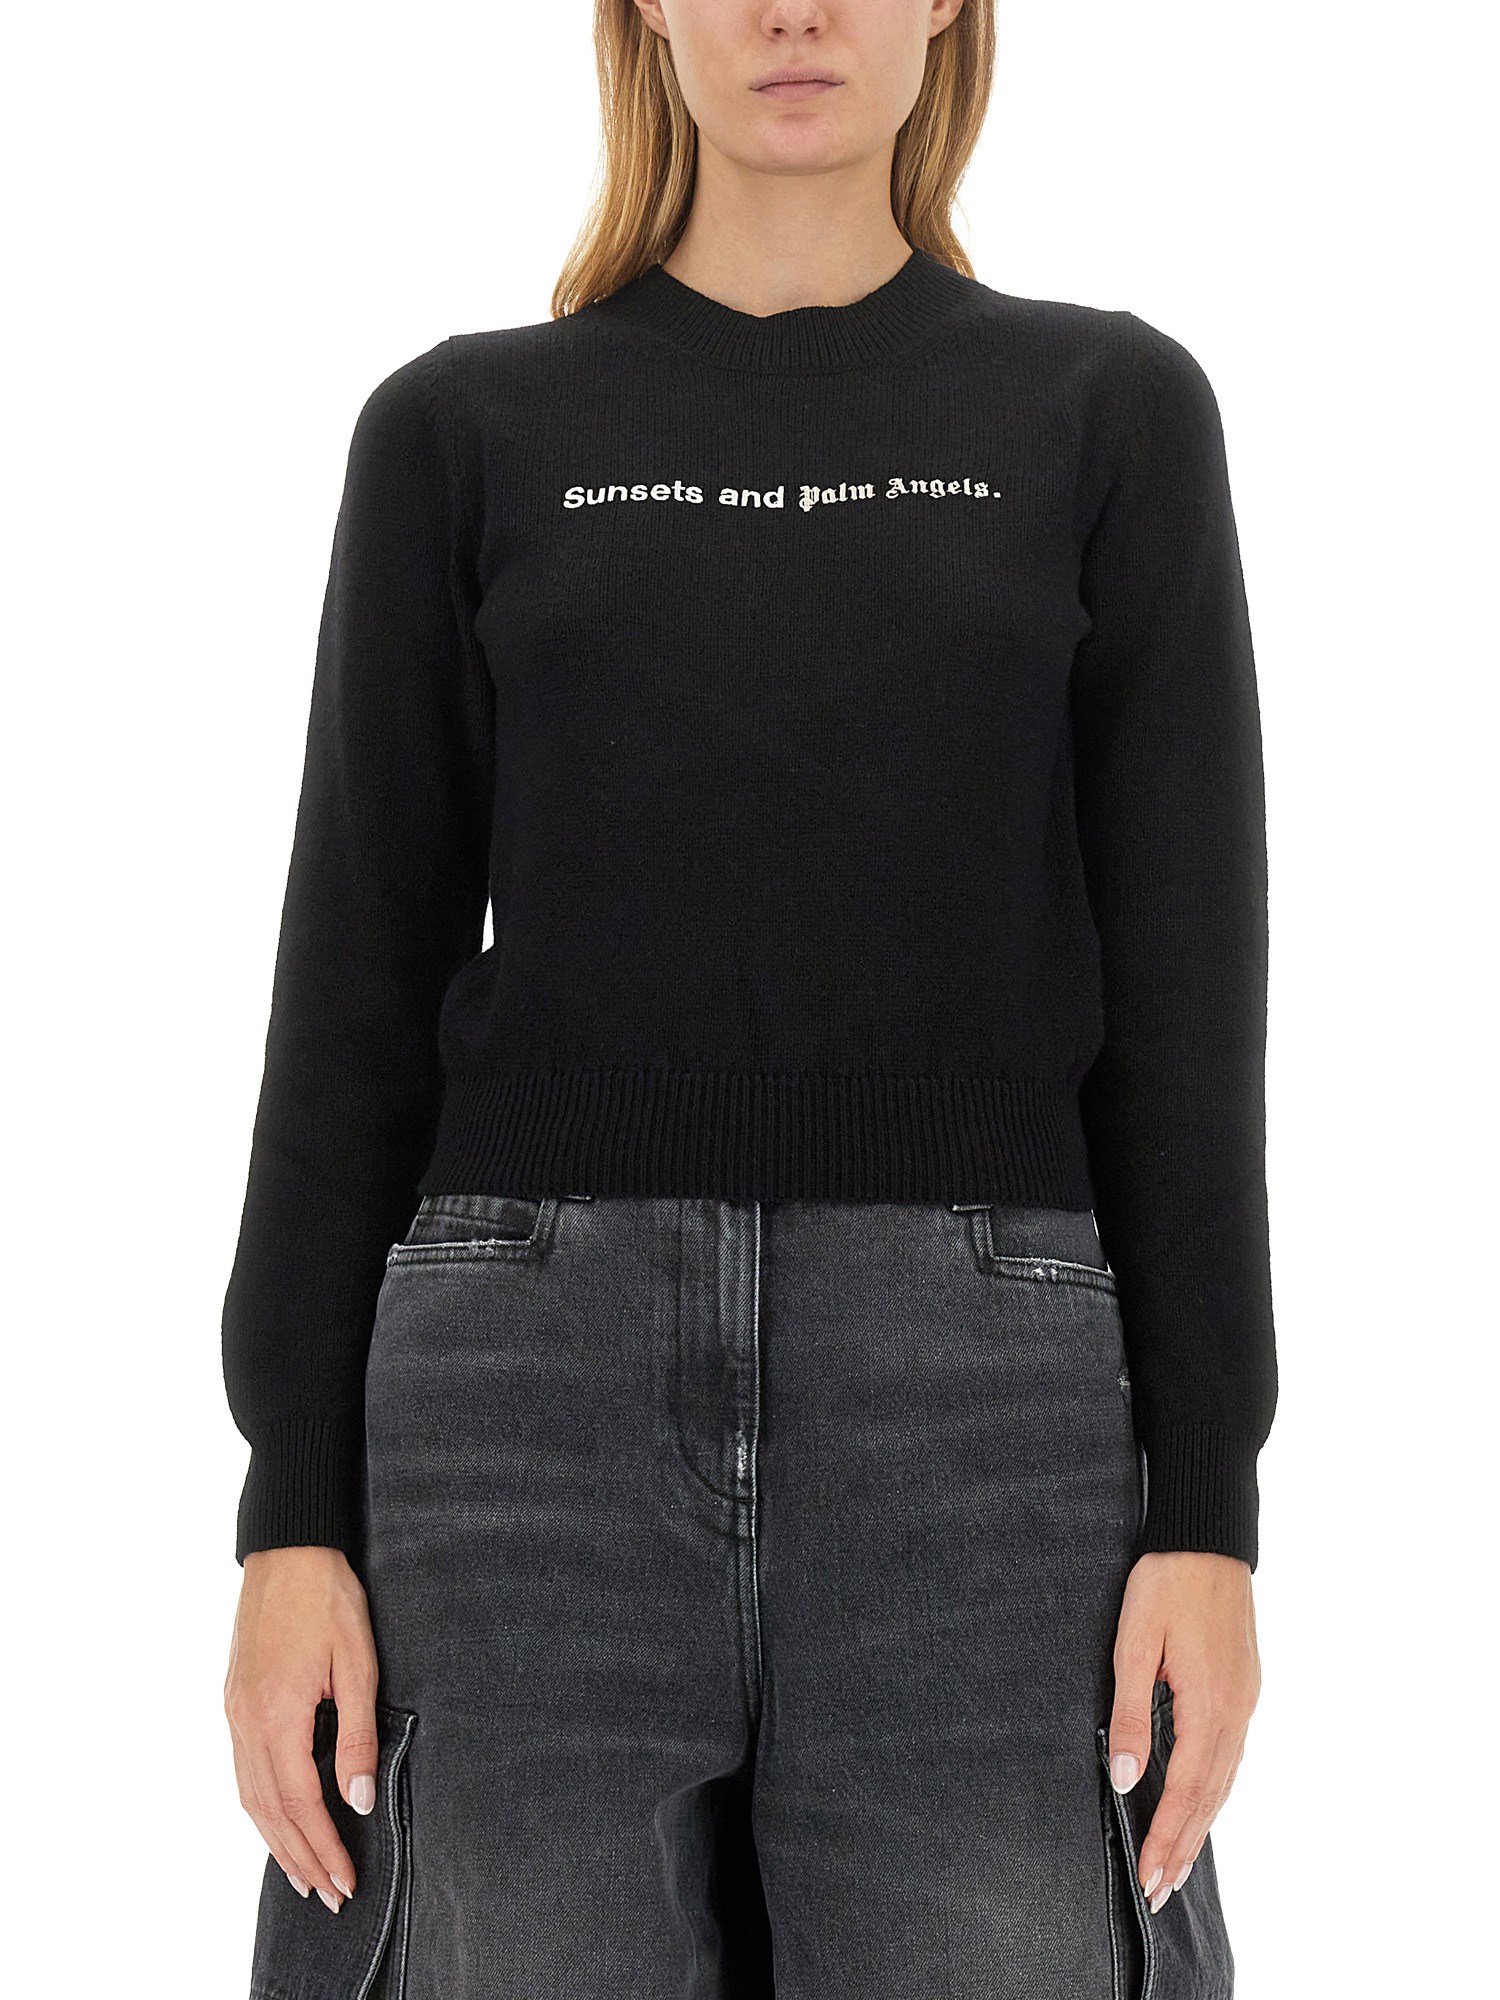 palm angels sunsets sweater